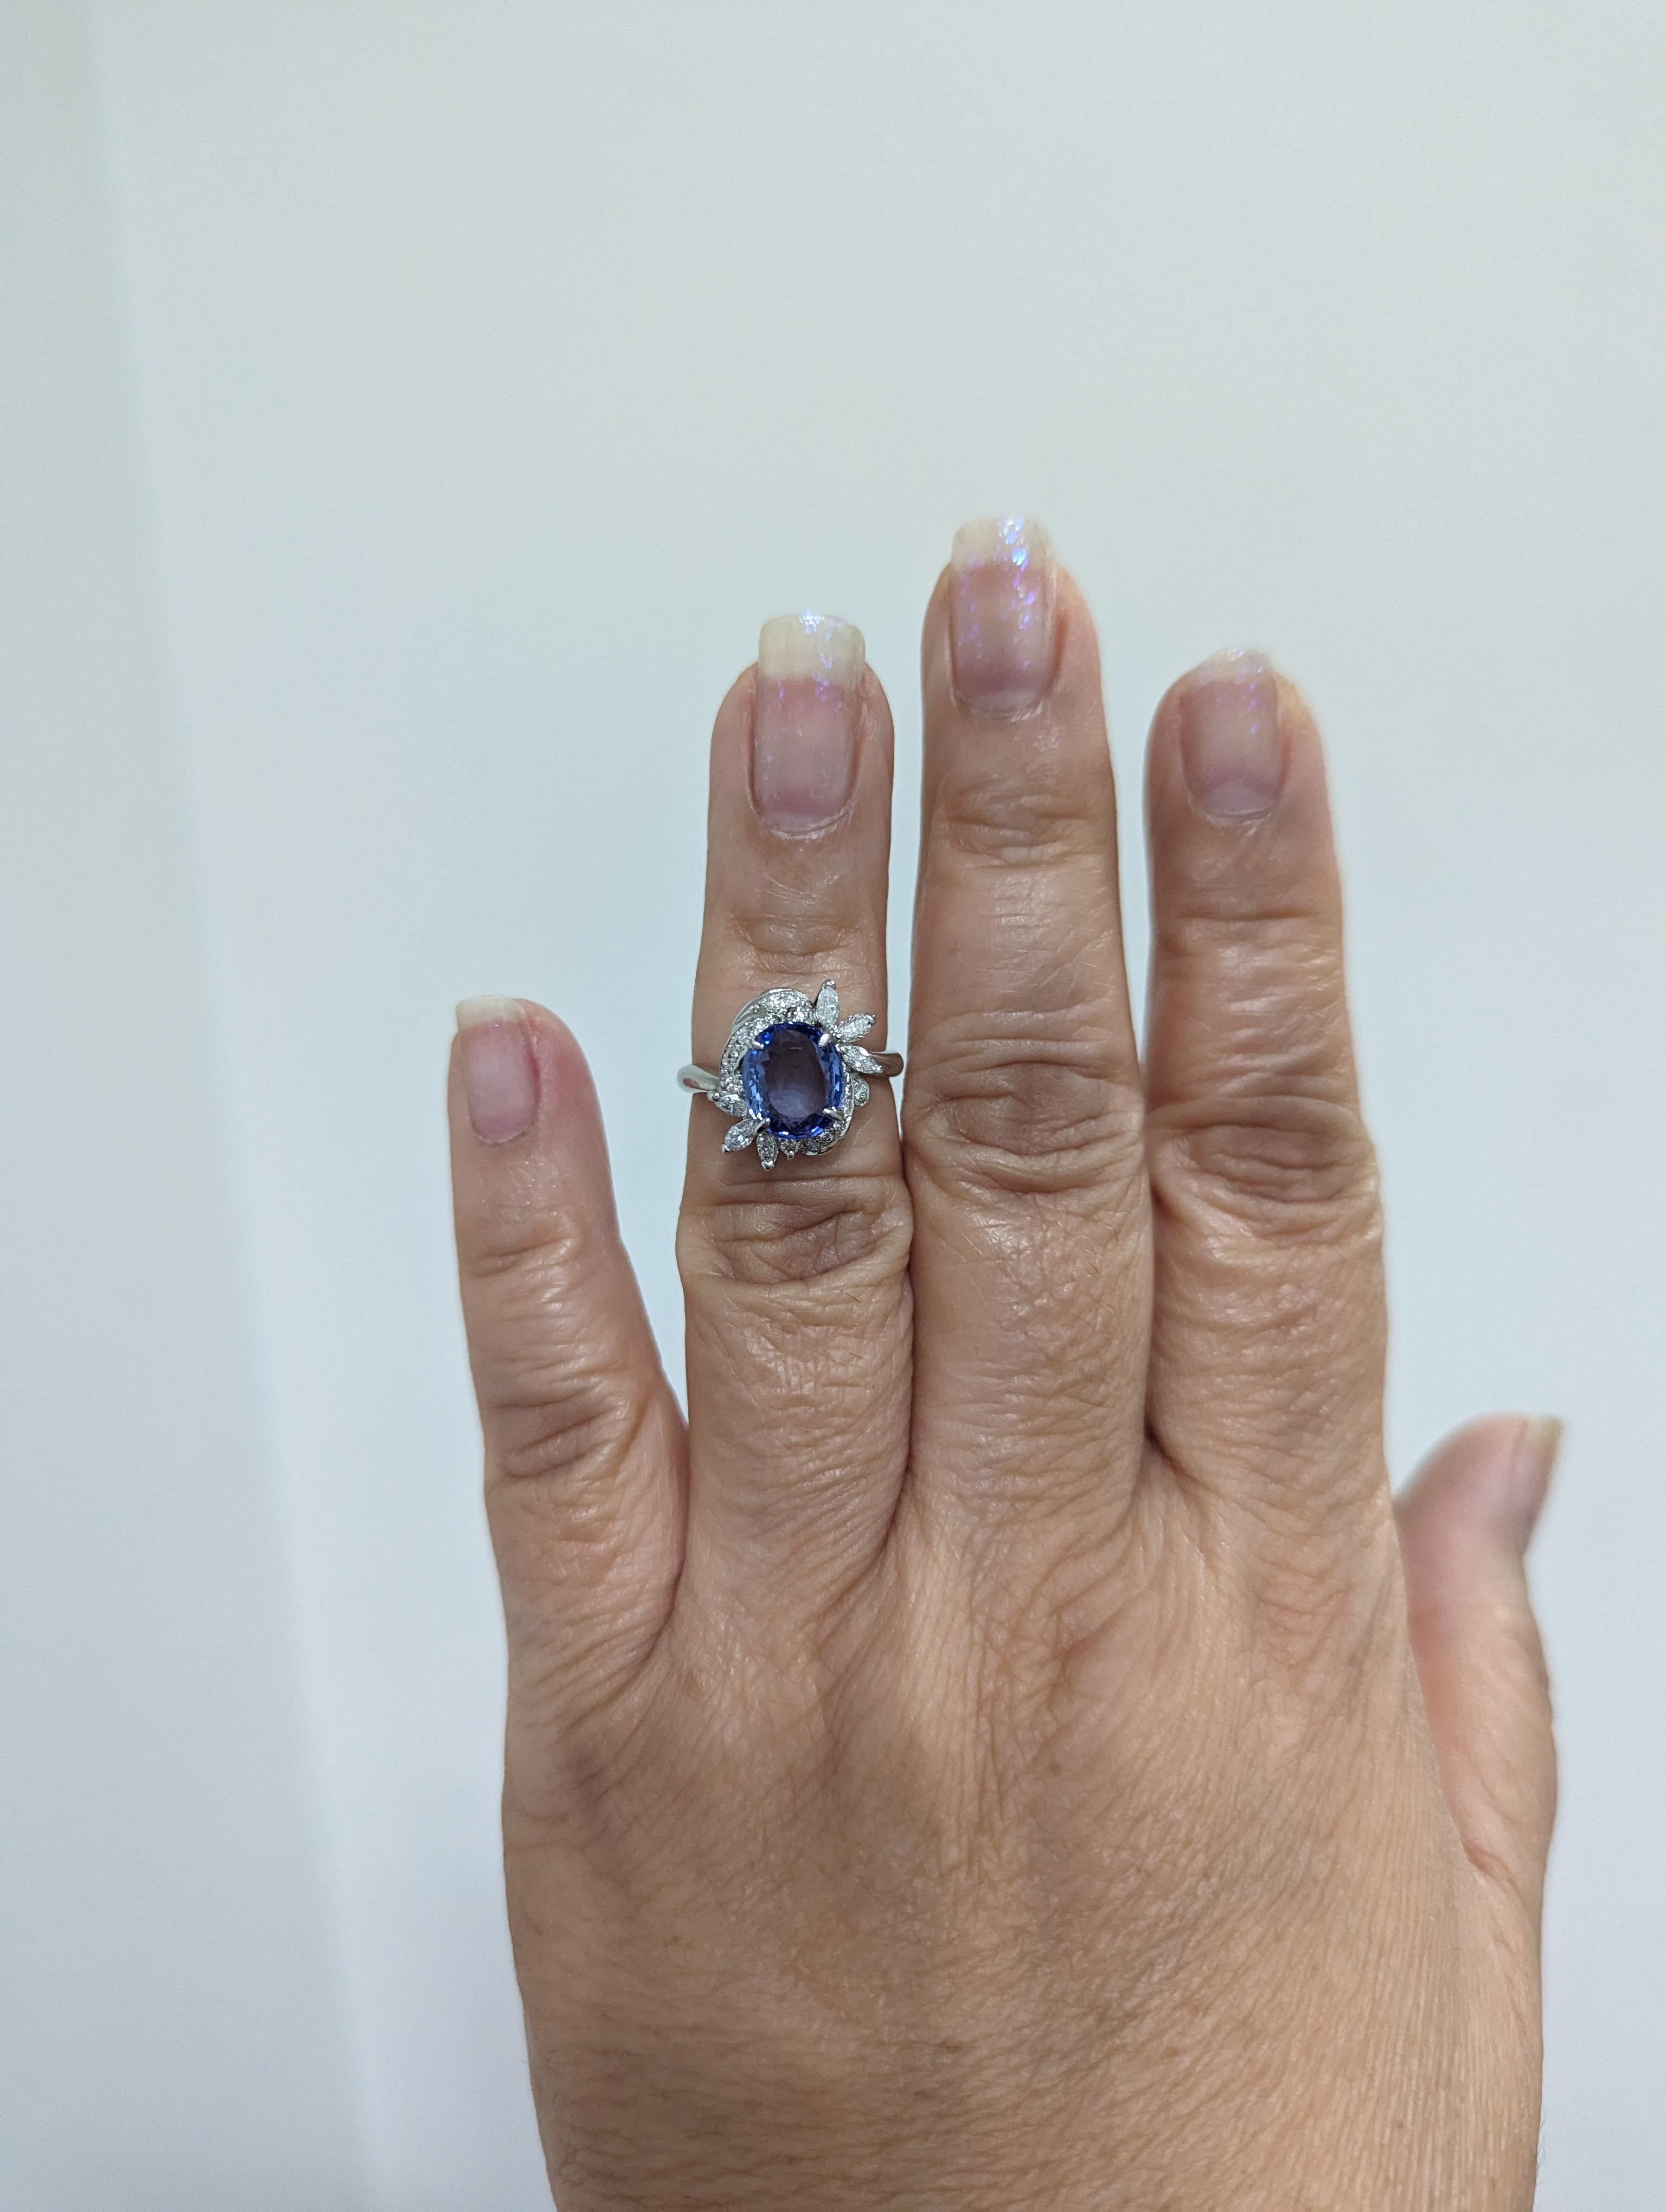 Beautiful 2.73 ct. unheated Sri Lanka blue sapphire oval with 0.48 ct. white diamond rounds and marquise shapes.  Handmade in platinum.  Ring size 6.
GIA certificate included.